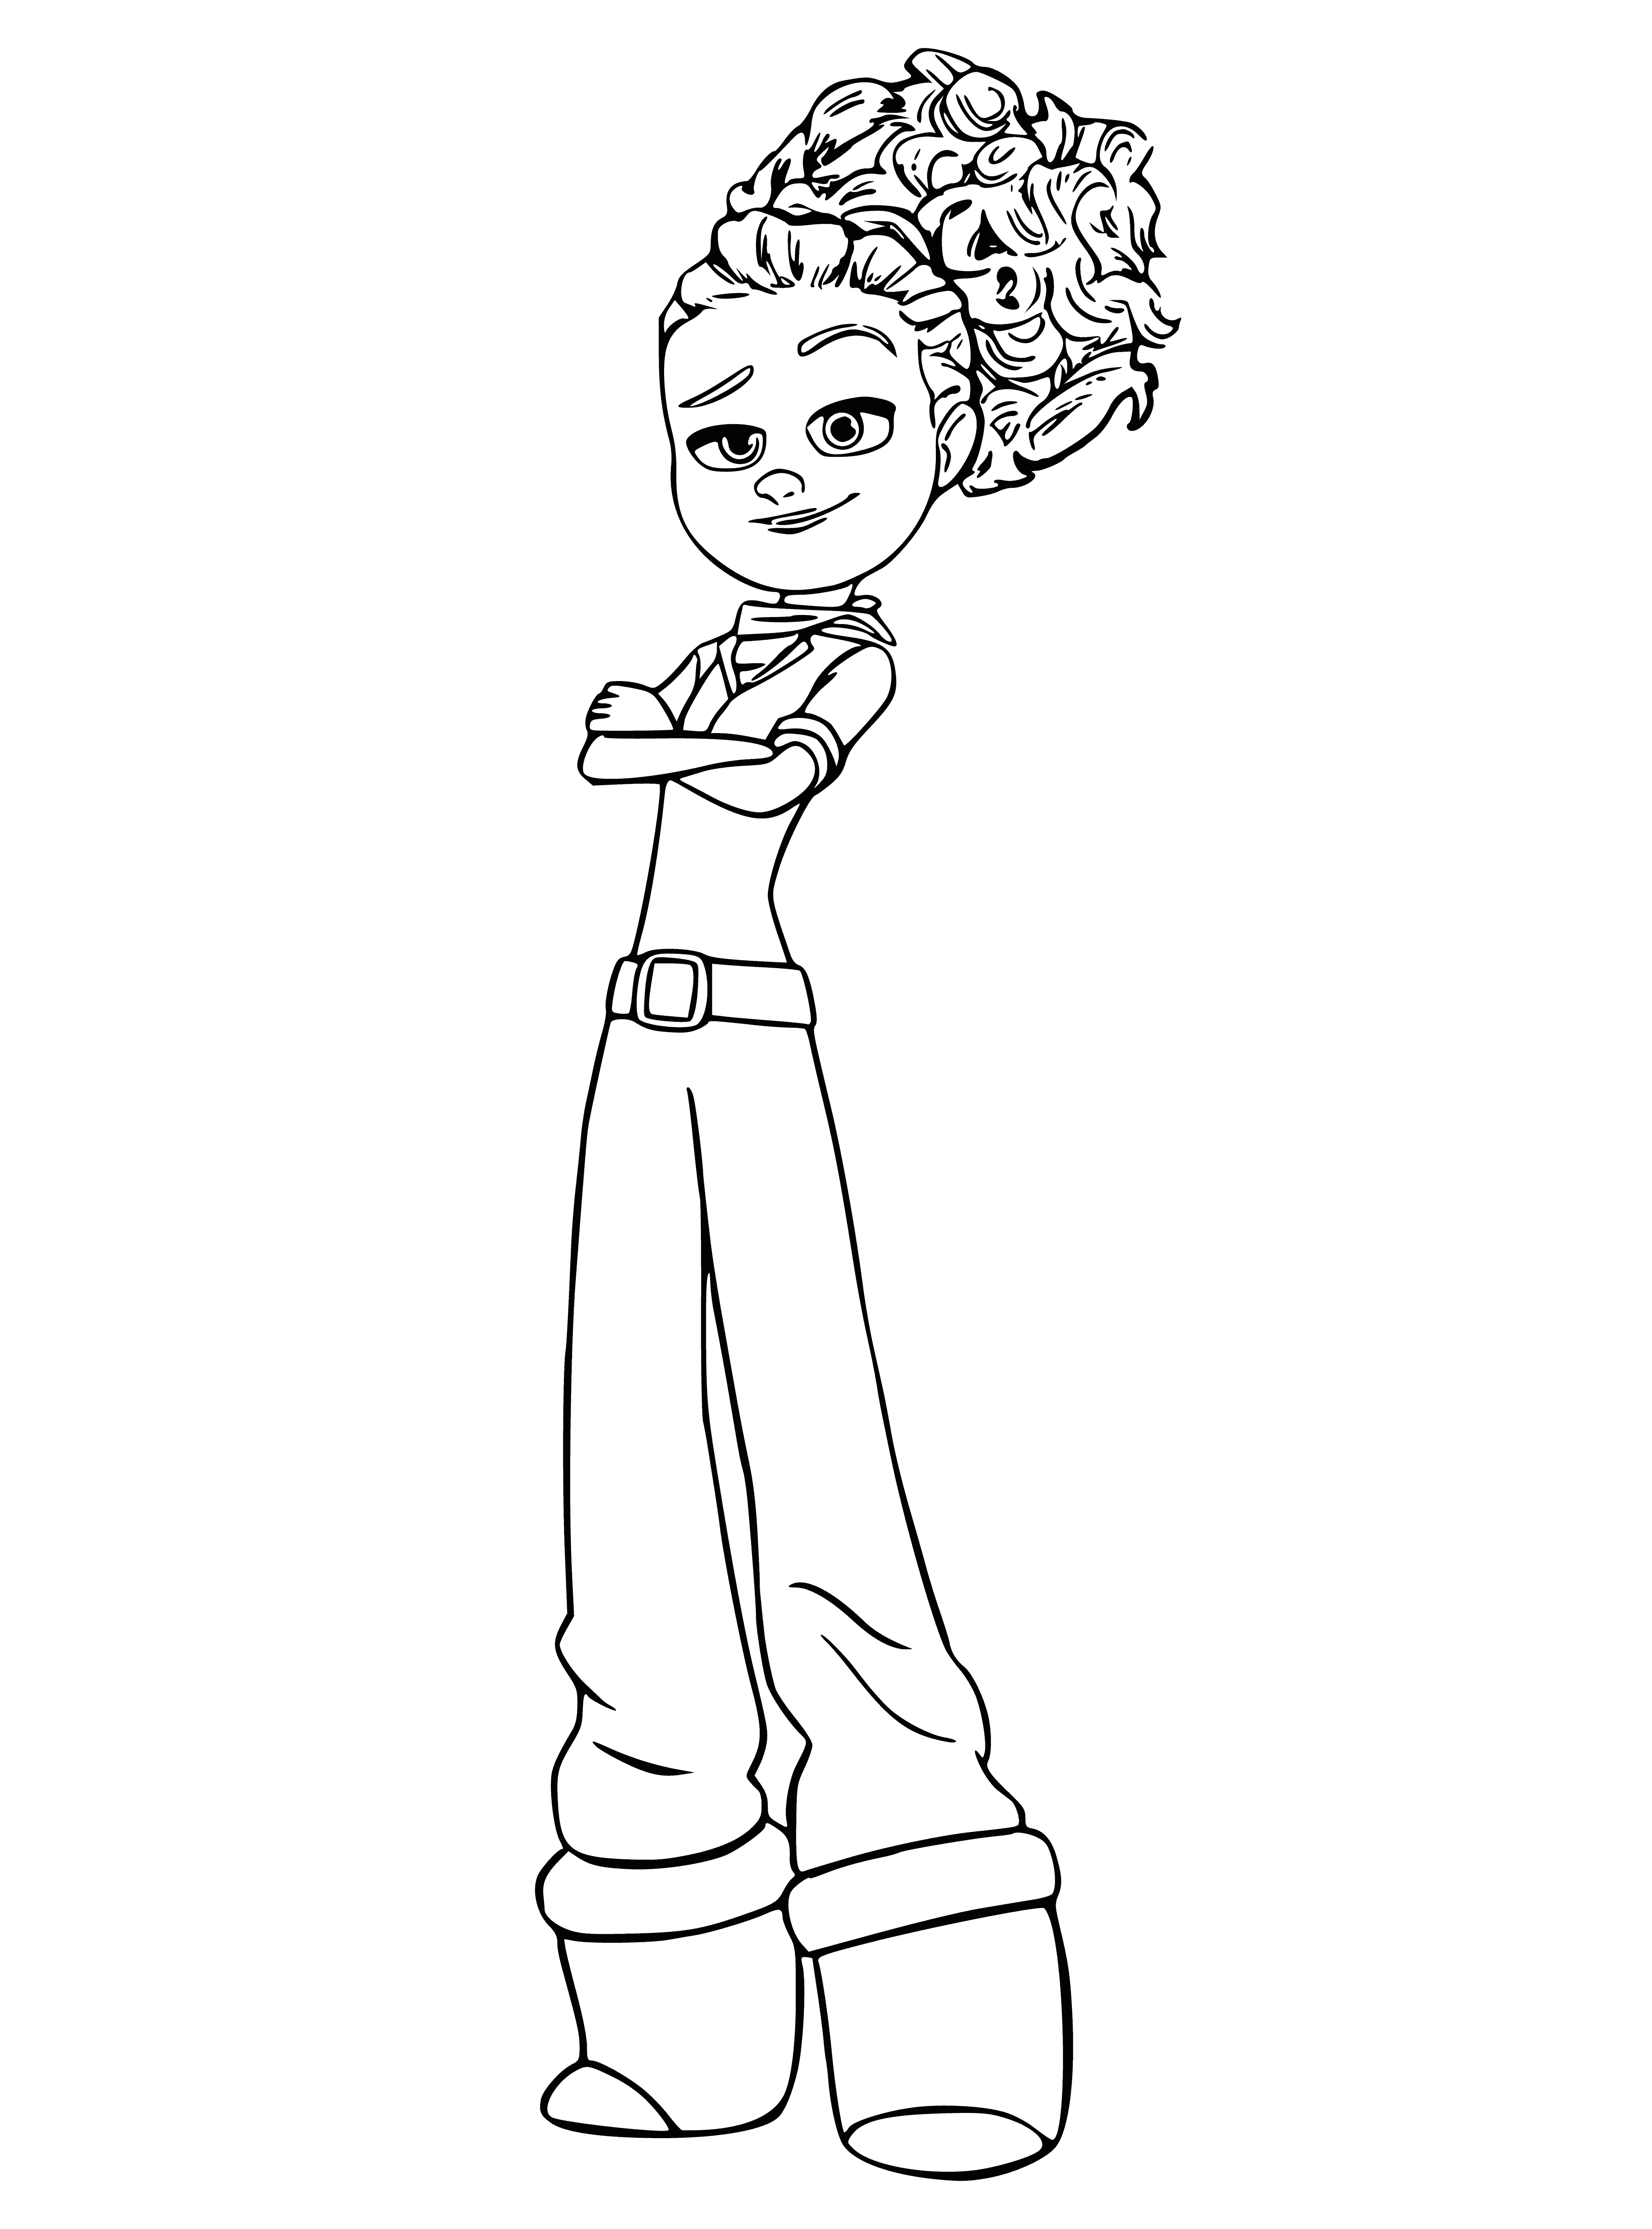 Buttercup coloring page